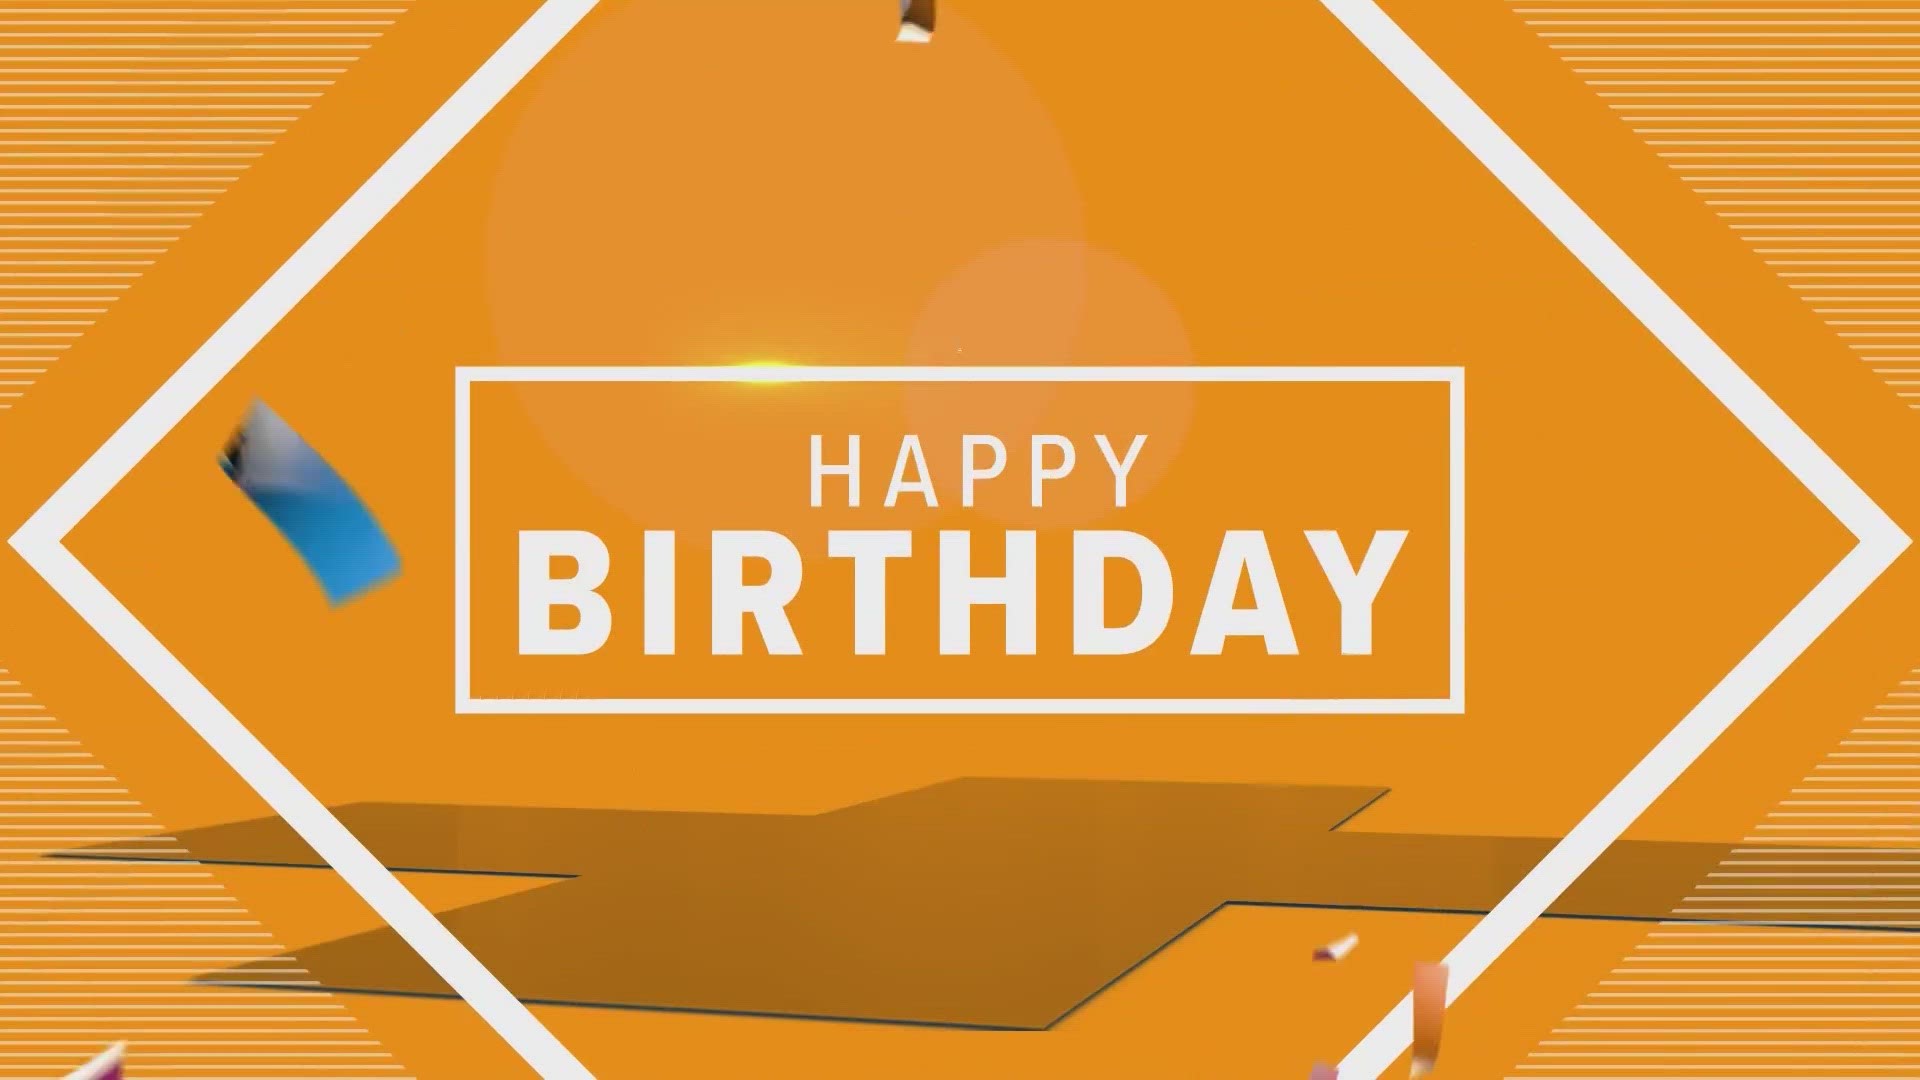 Texas Today is wishing everyone born on May 25, a very happy birthday!